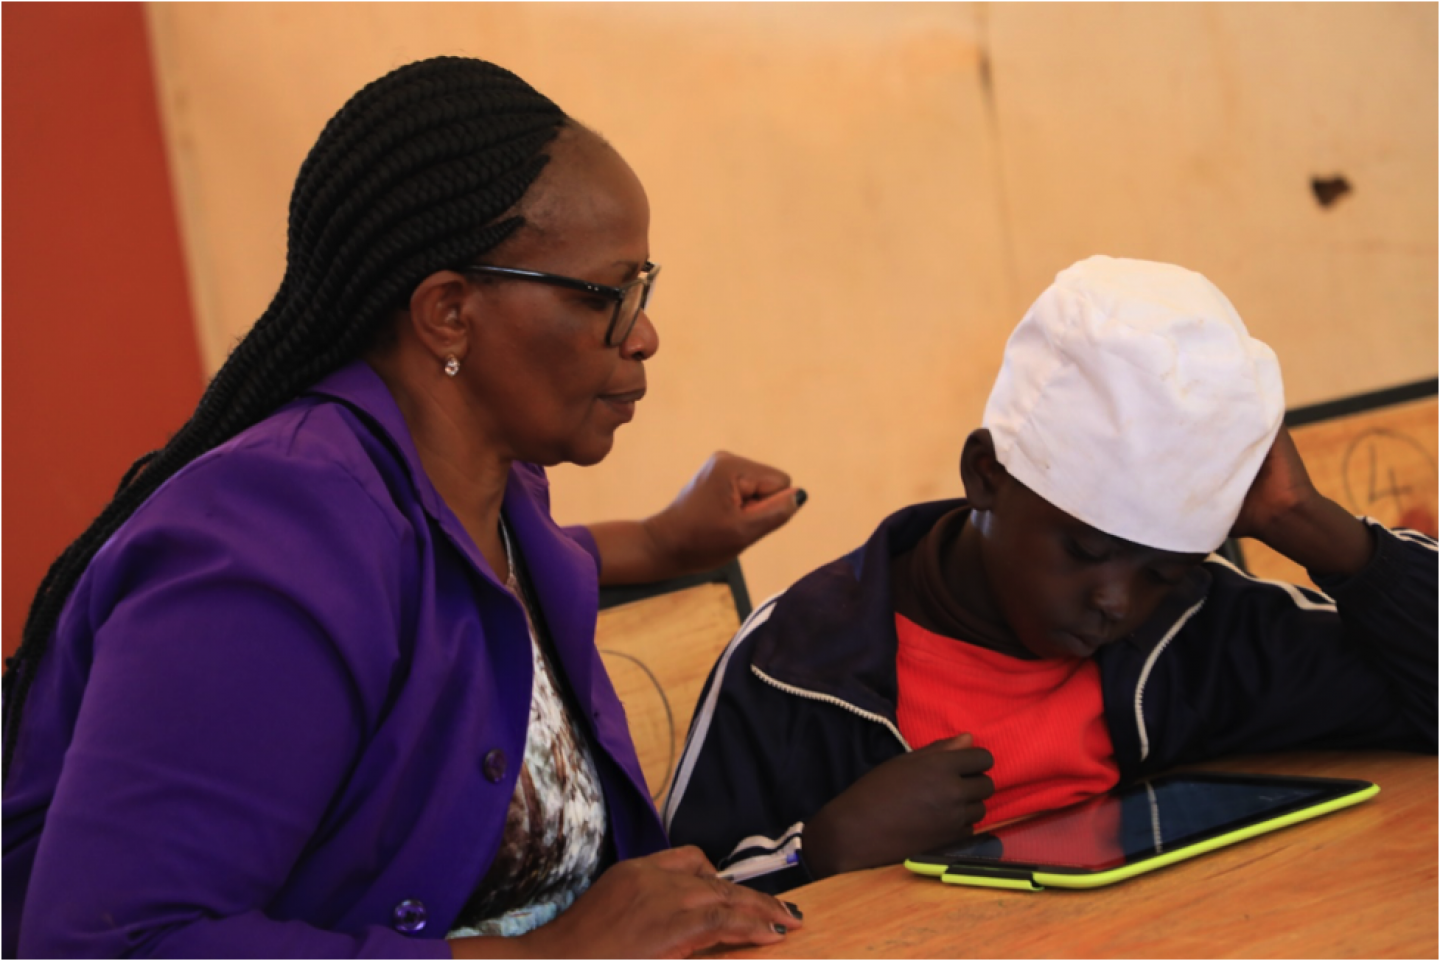 Teacher Jane Njoroge looks on as Frank from Mugumoini Primary School in Thika Town uses his digital tablet